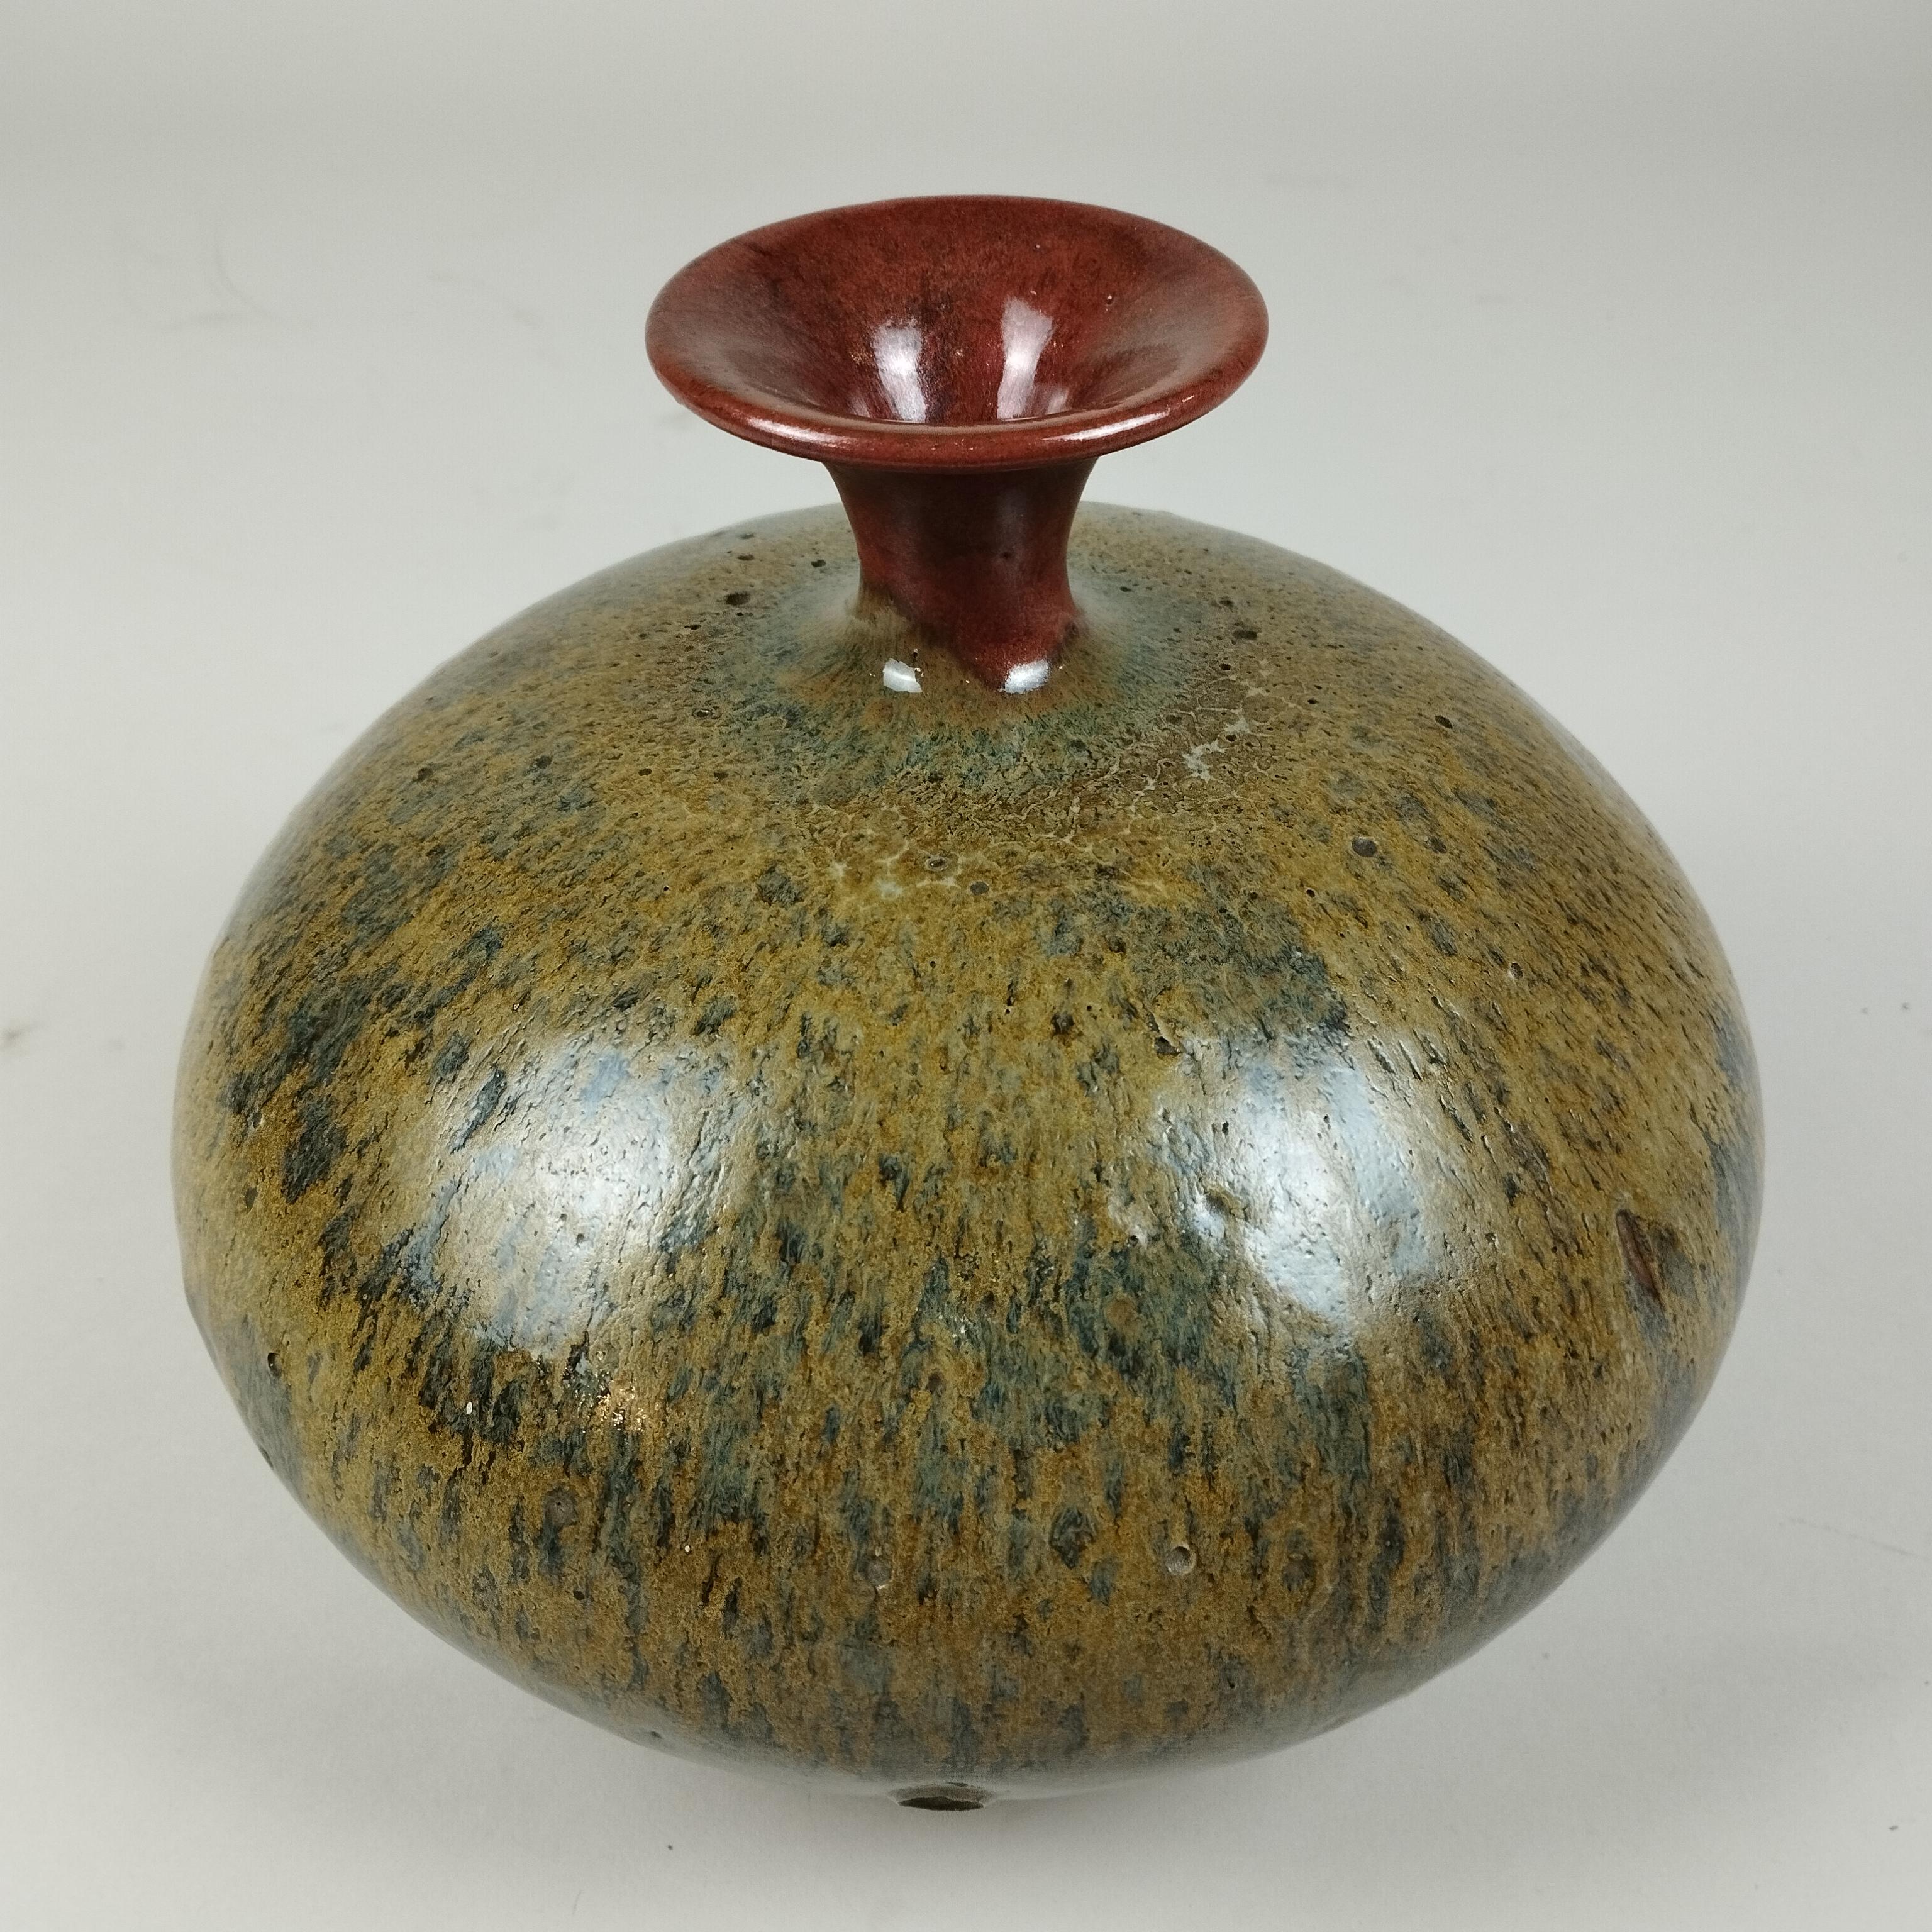 A Mexican high temperature vase by Alberto Díaz de Cossío. Manufactured at the Taller Experimental de Cerámica in Mexico City (Experimental Ceramic's Workshop). The bulged vase with narrow neck in orange shows green and ochre colors. A one of a kind